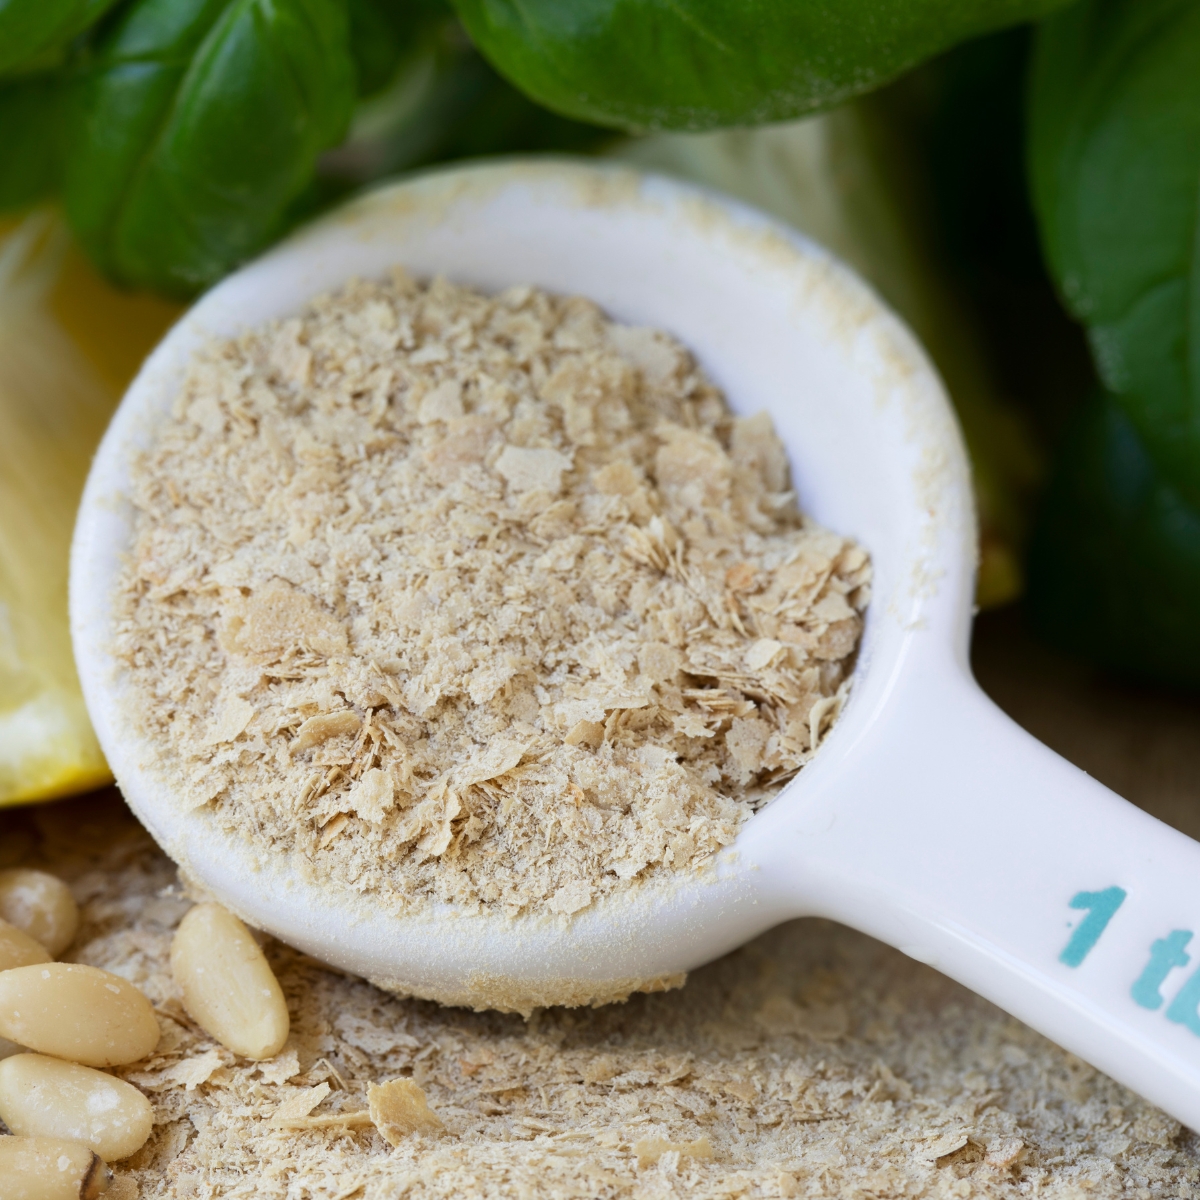 What is nutritional yeast